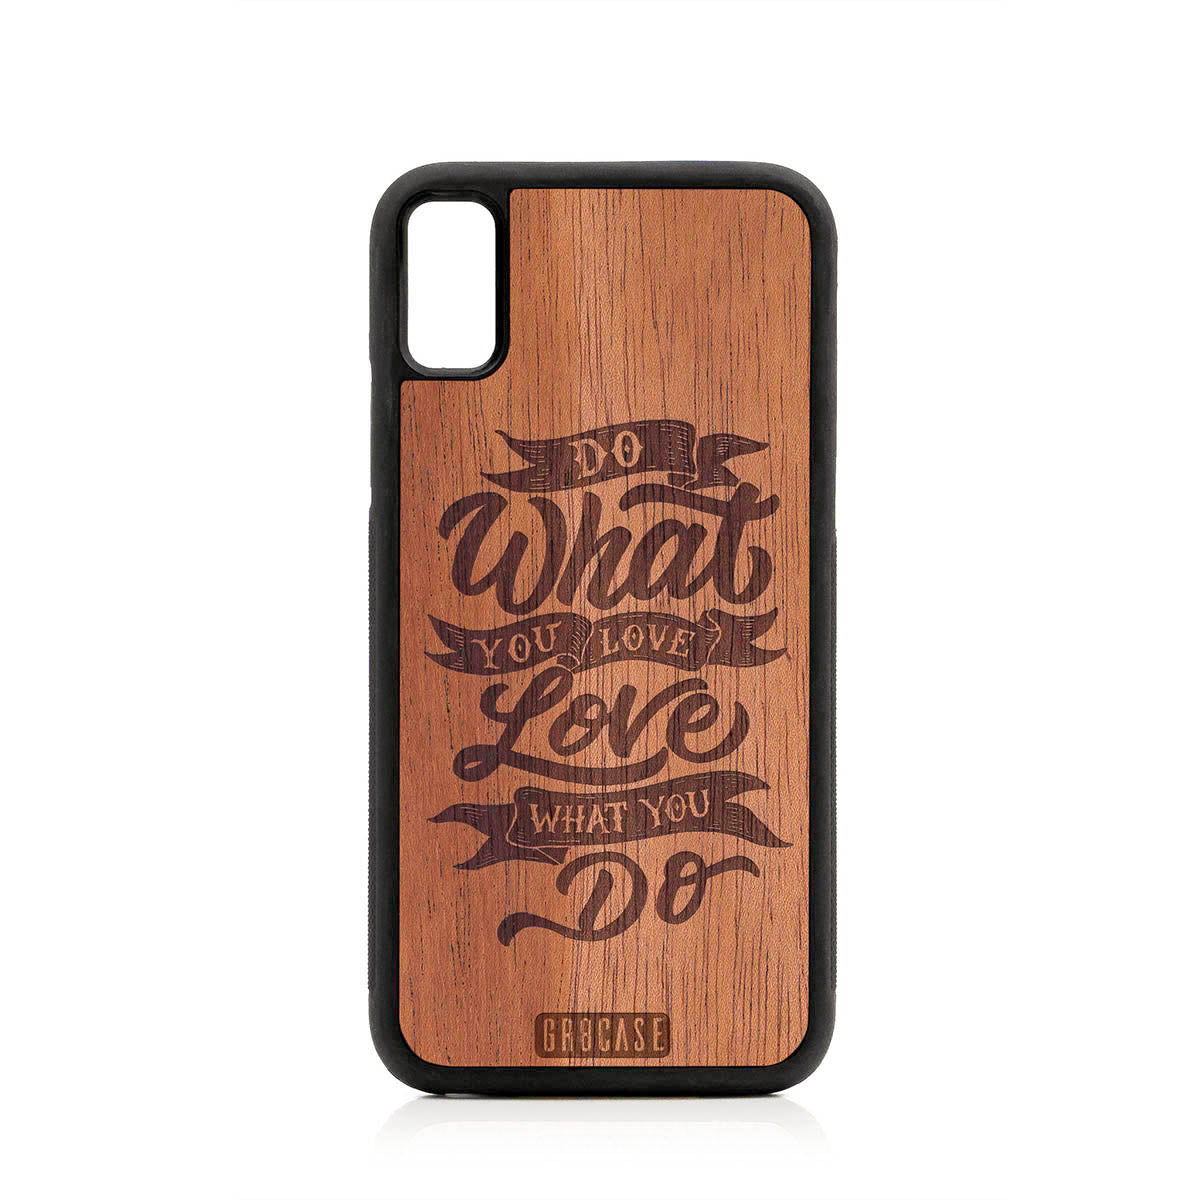 Do What You Love Love What You Do Design Wood Case For iPhone XR by GR8CASE